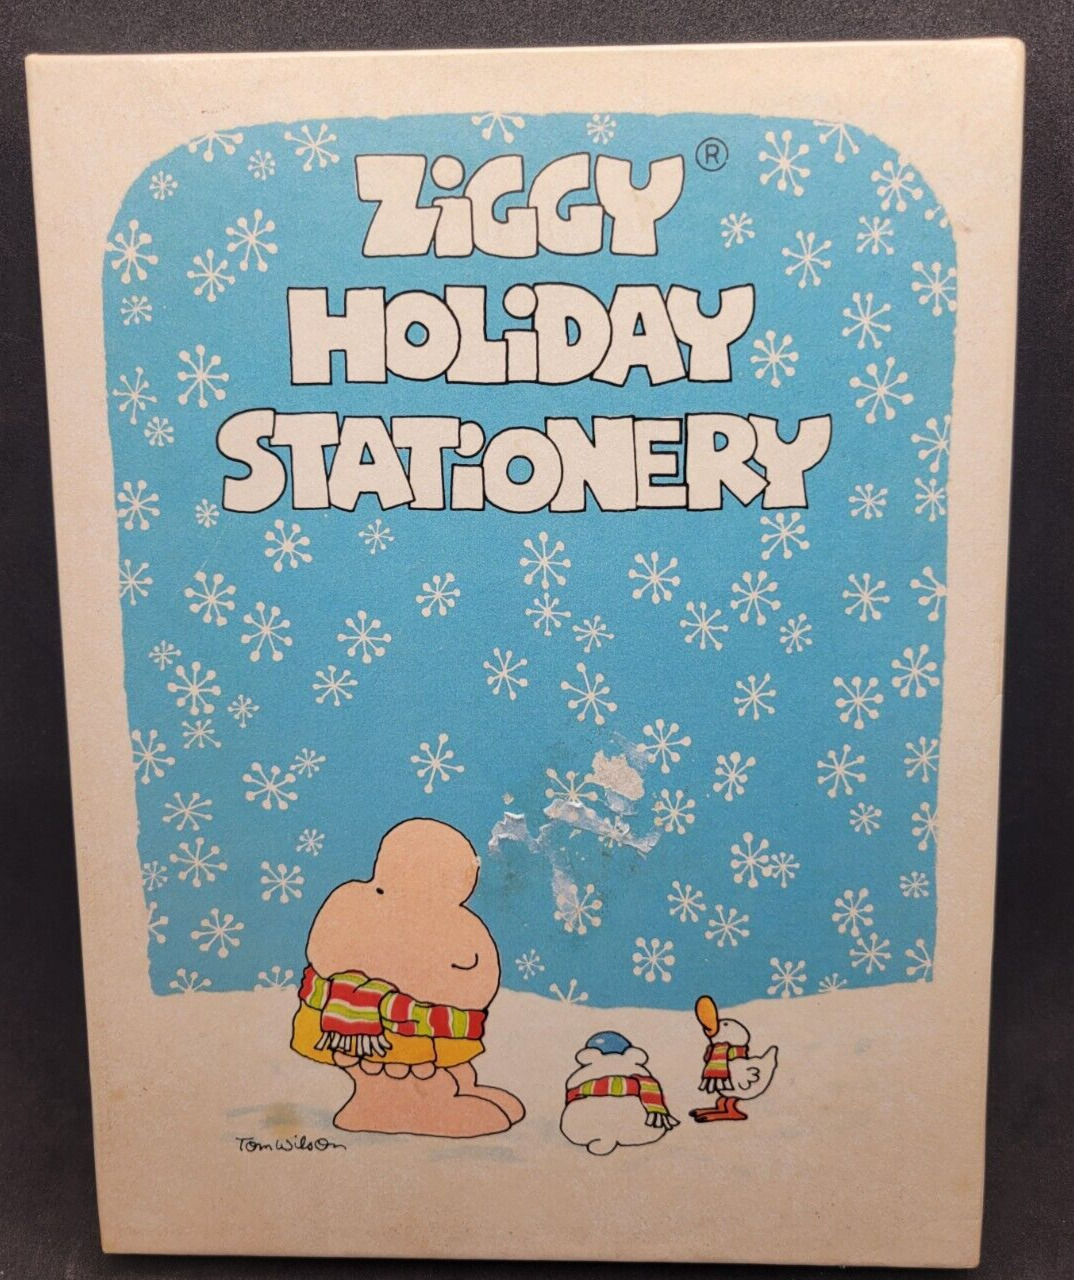 VINTAGE 1983 AMERICAN GREETINGS ZIGGY HOLIDAY STATIONARY NEW IN PACKAGE